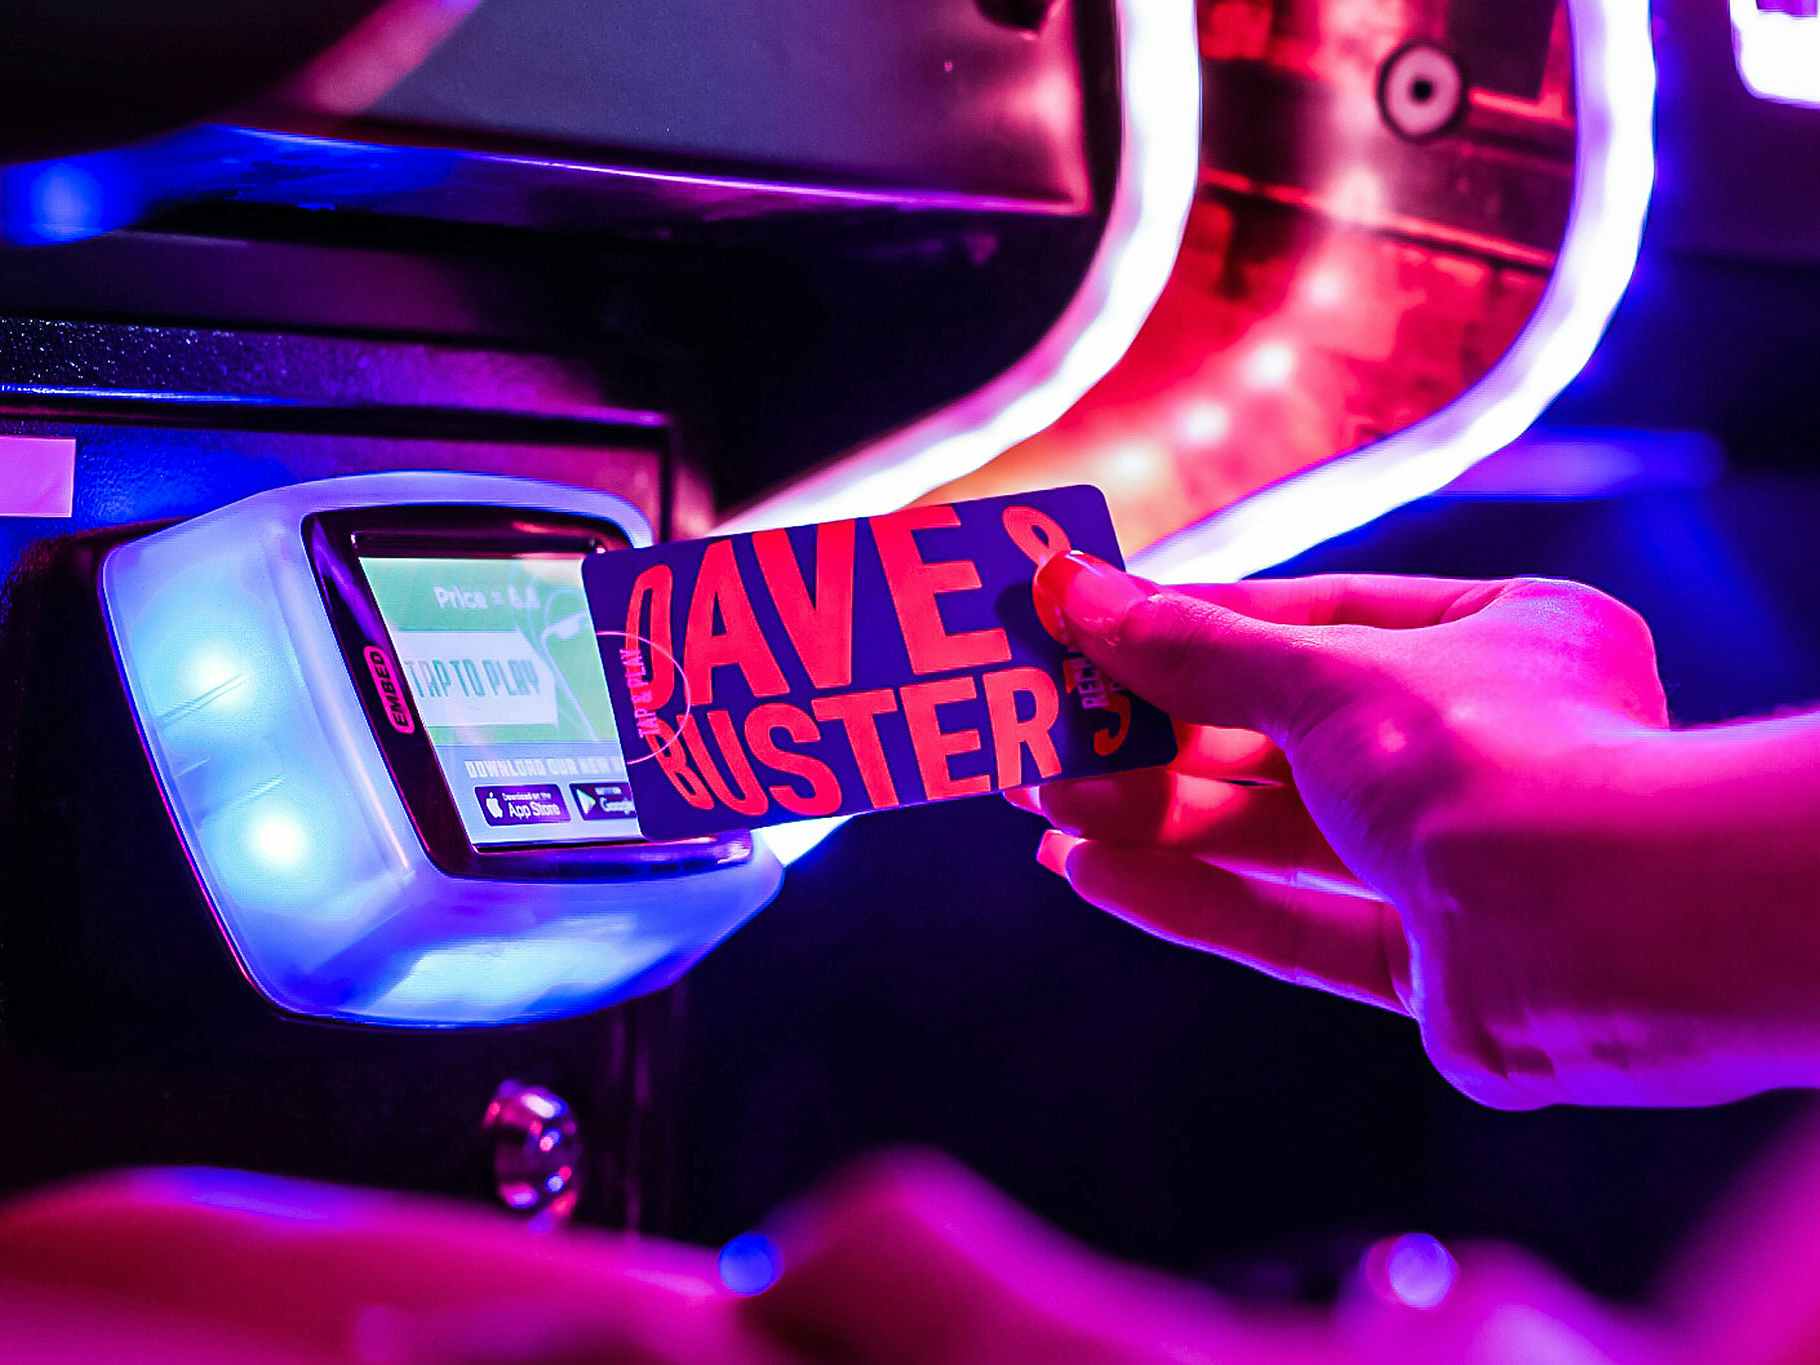 Dave & Buster's - Spring into FUN with $20 FREE* Game Play when you  download the Charging Station Mobile App! Get it NOW:   #SpringBreak #DaveAndBusters